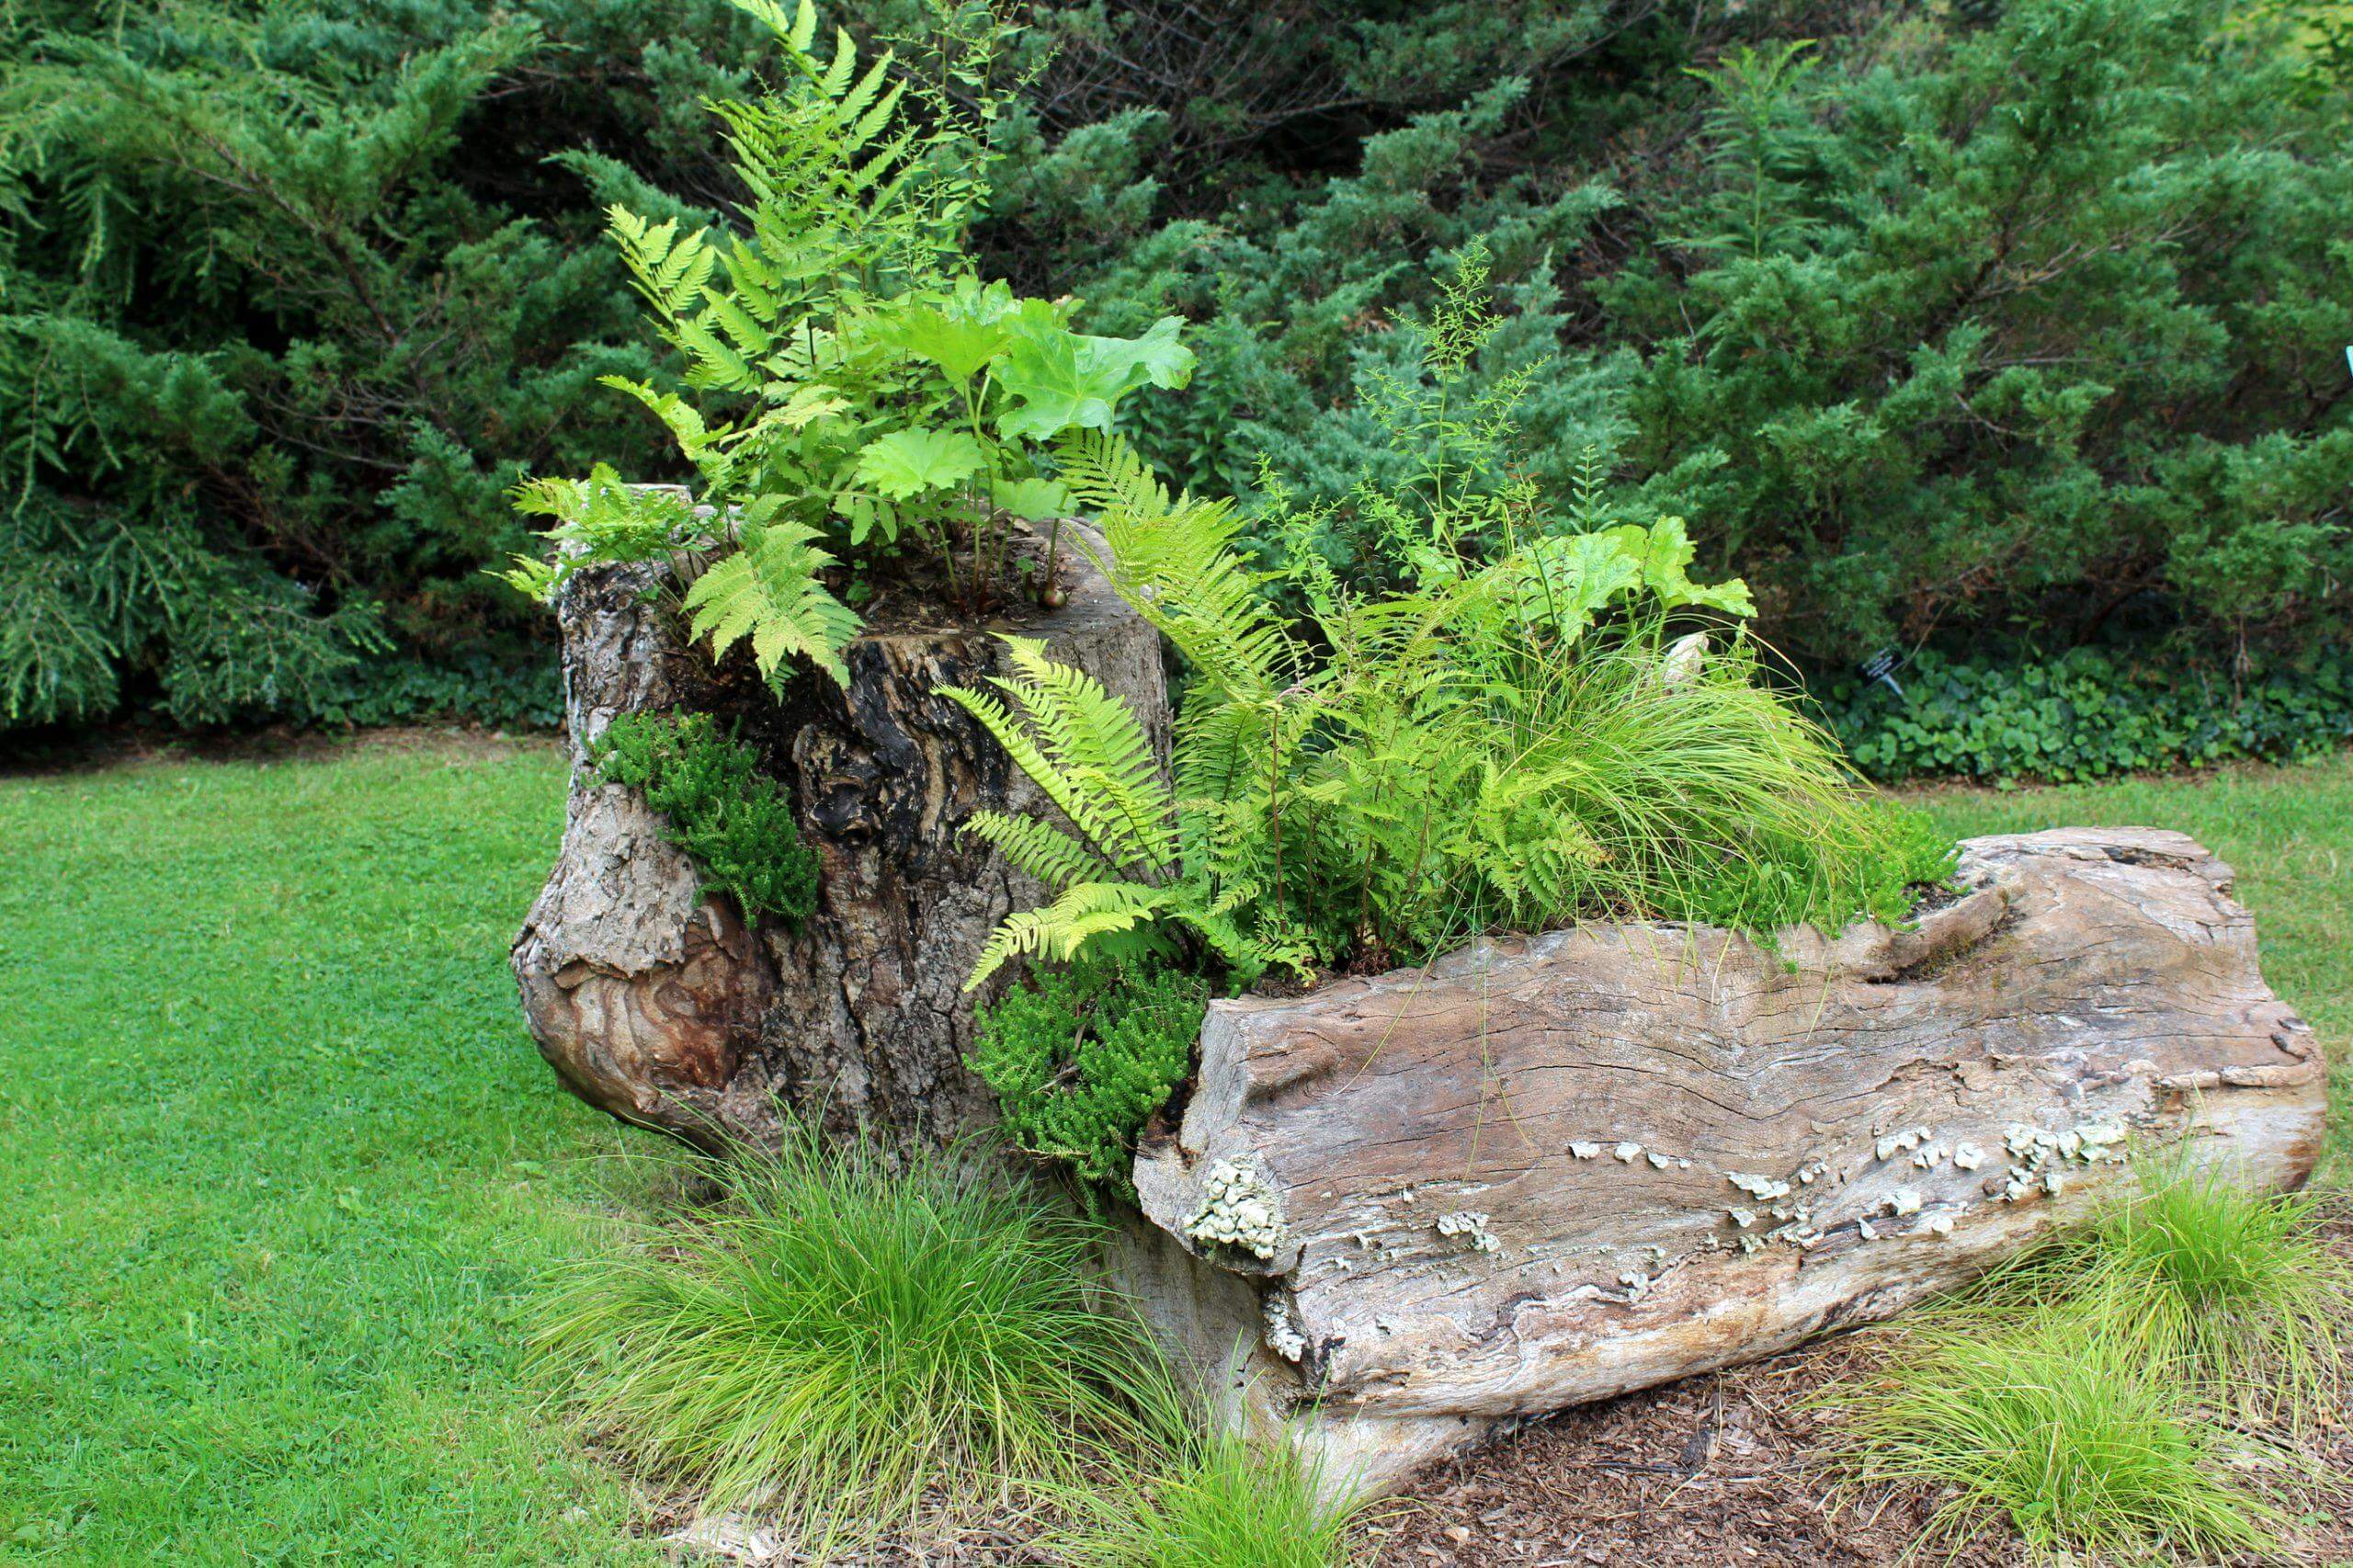 Natural setting of grassy lawn with old tree stumps and ferns growing out from them